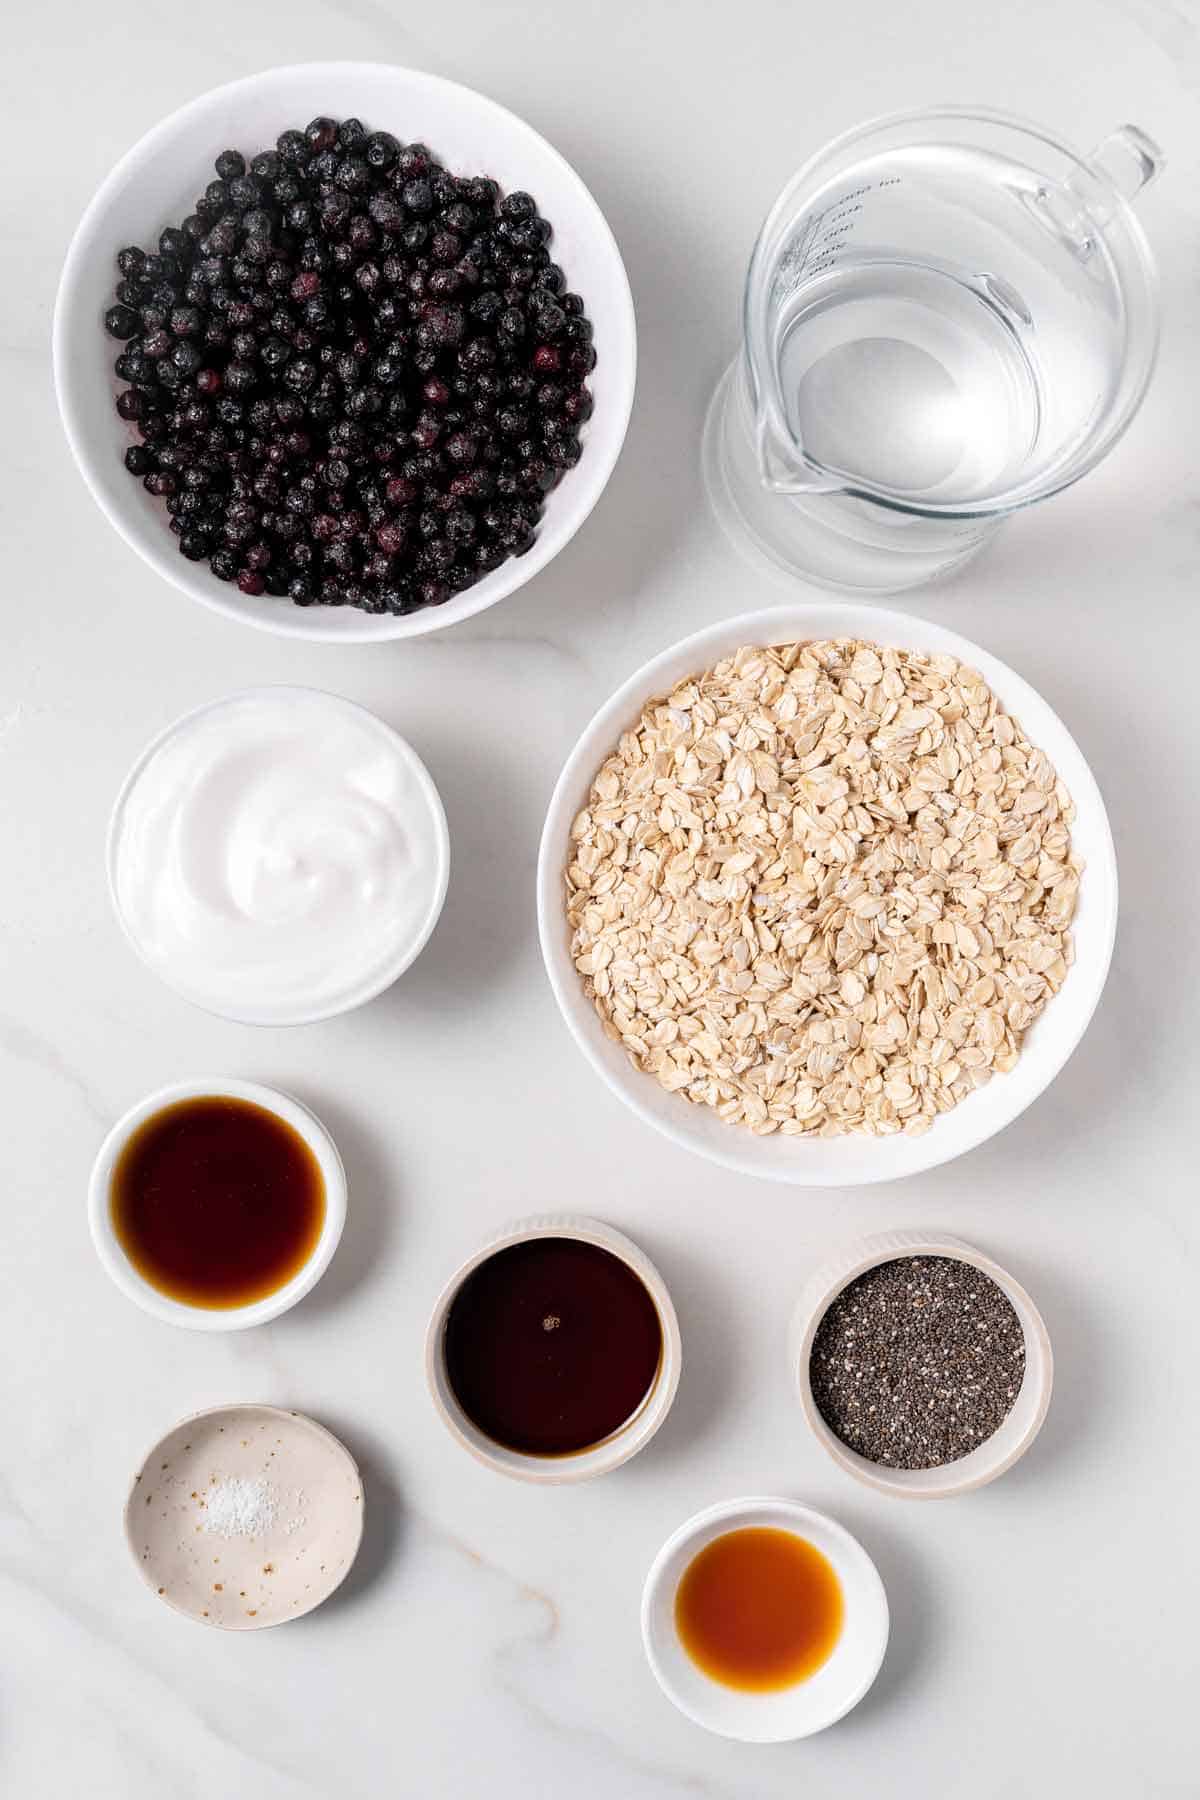 Ingredients needed to make blueberry overnight oats.